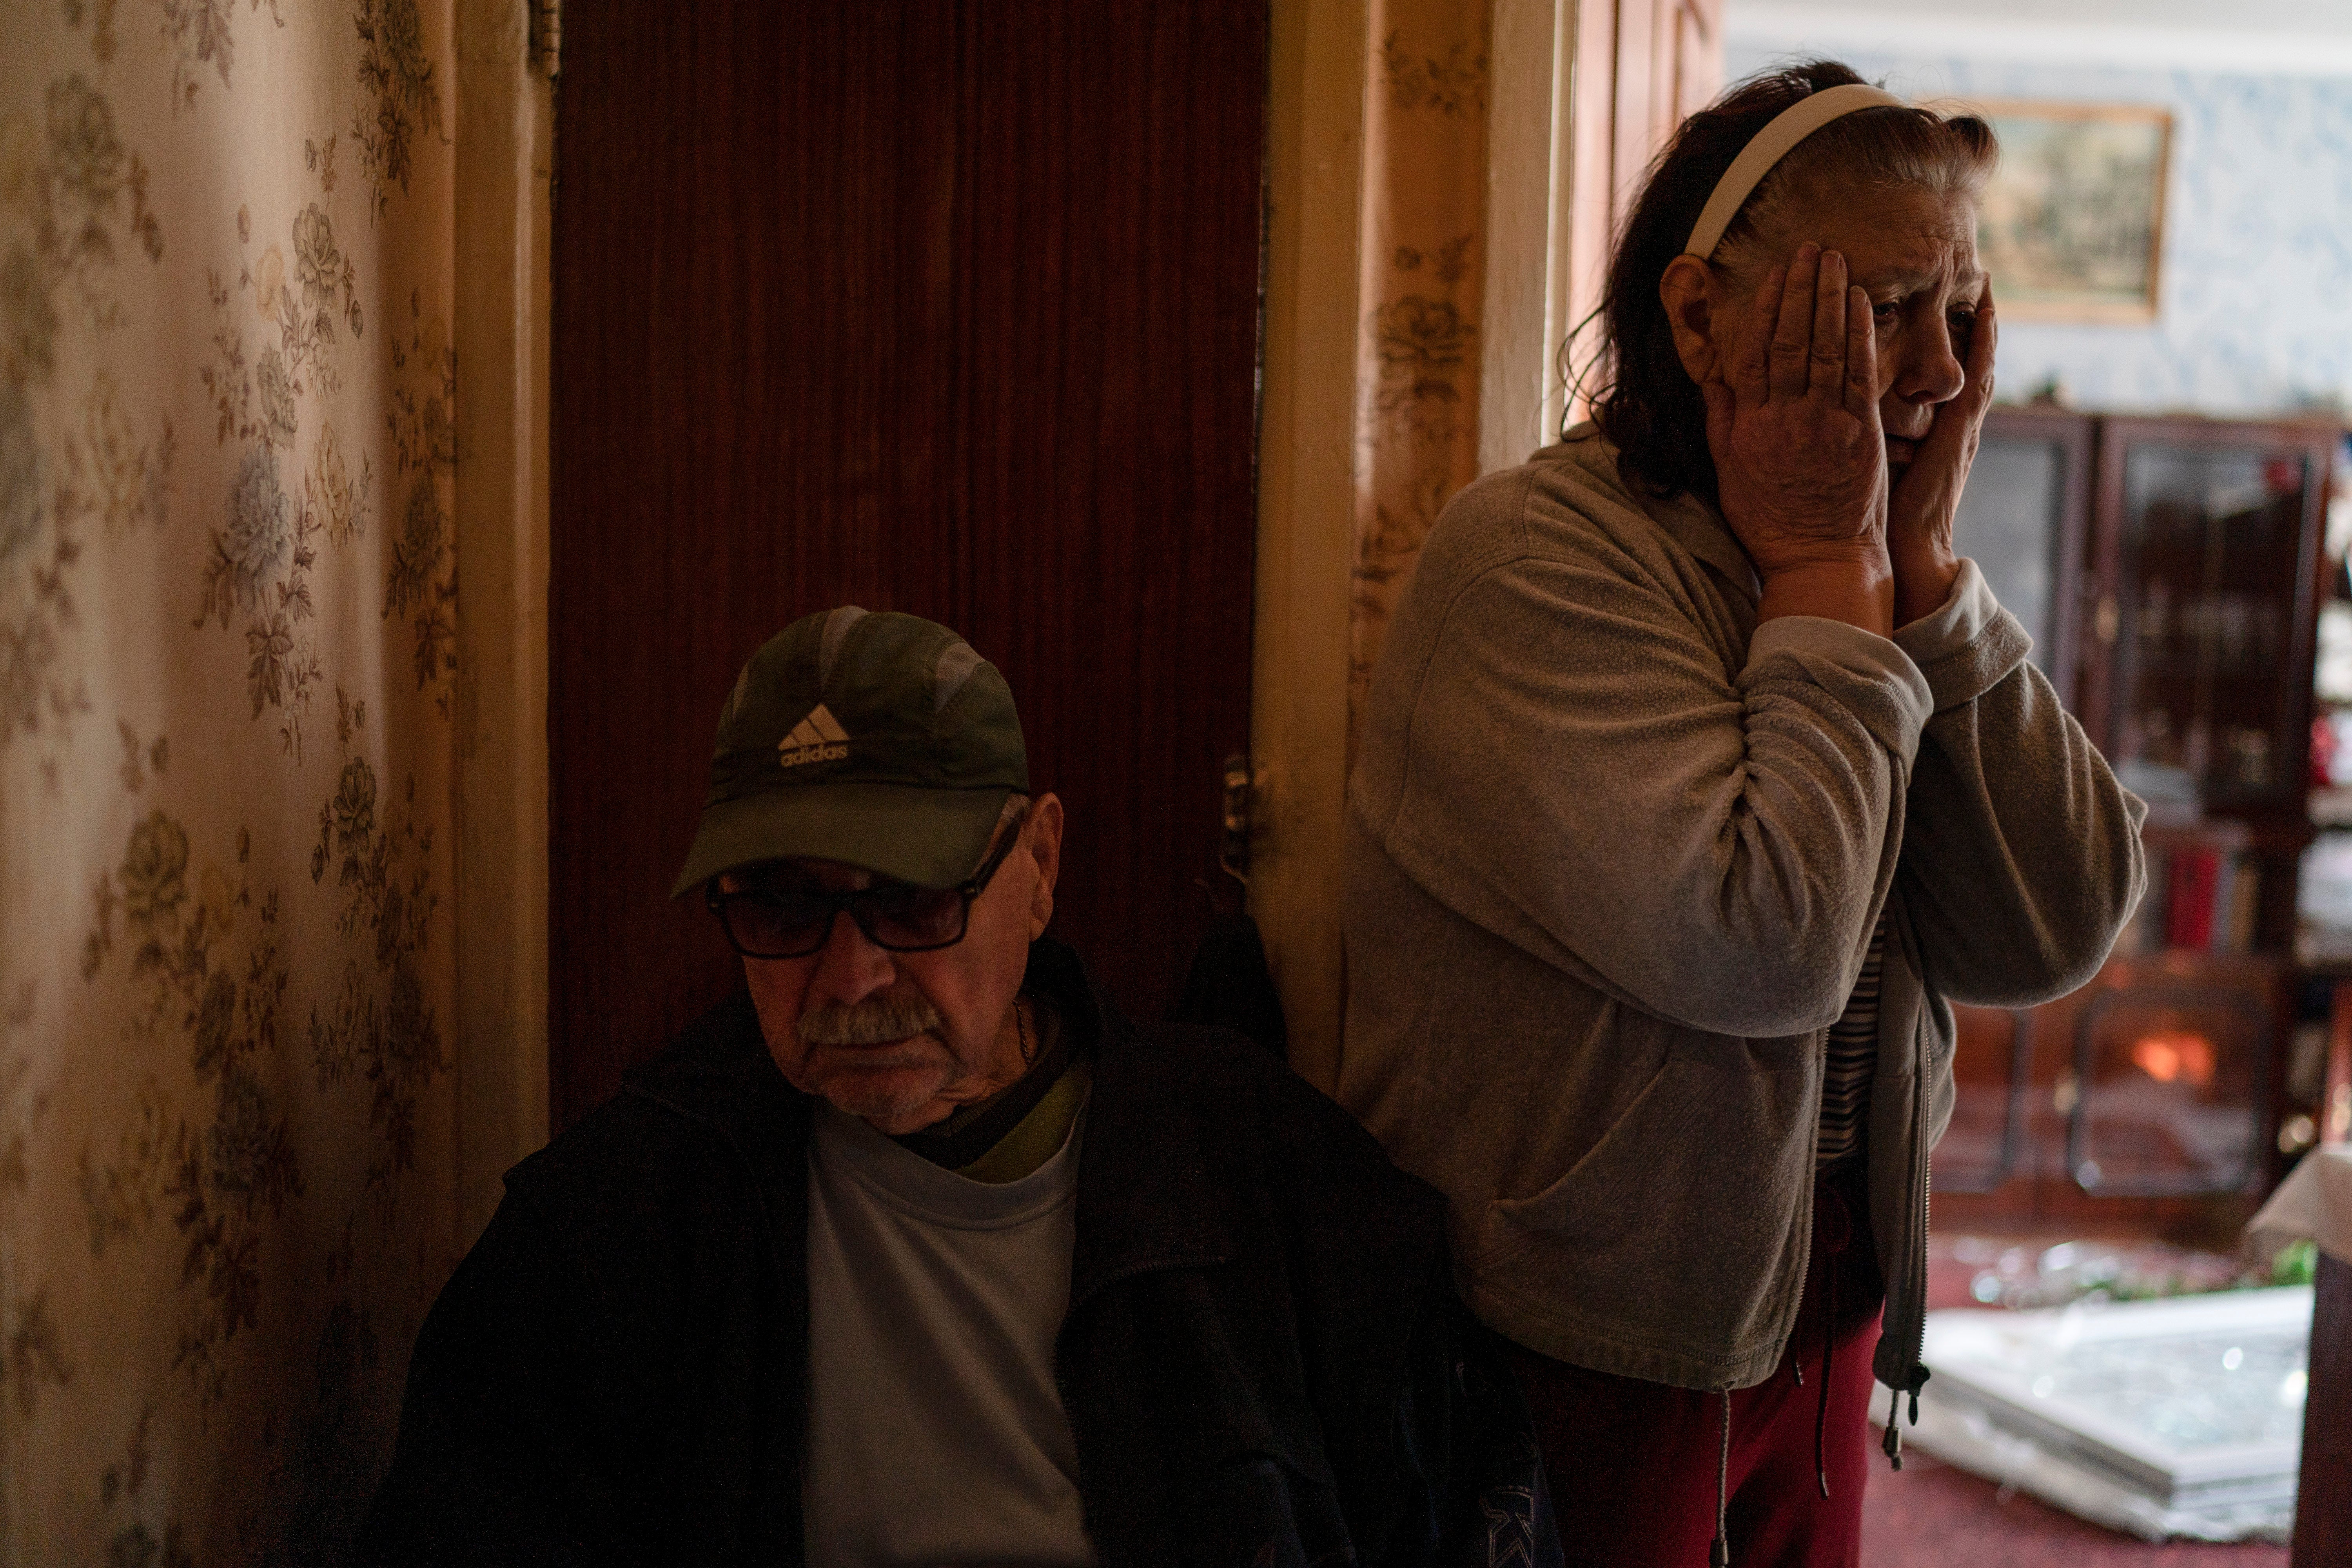 Tetyana and Oleksii Lazunko, distraught that their home for more than 40 years has been ruined